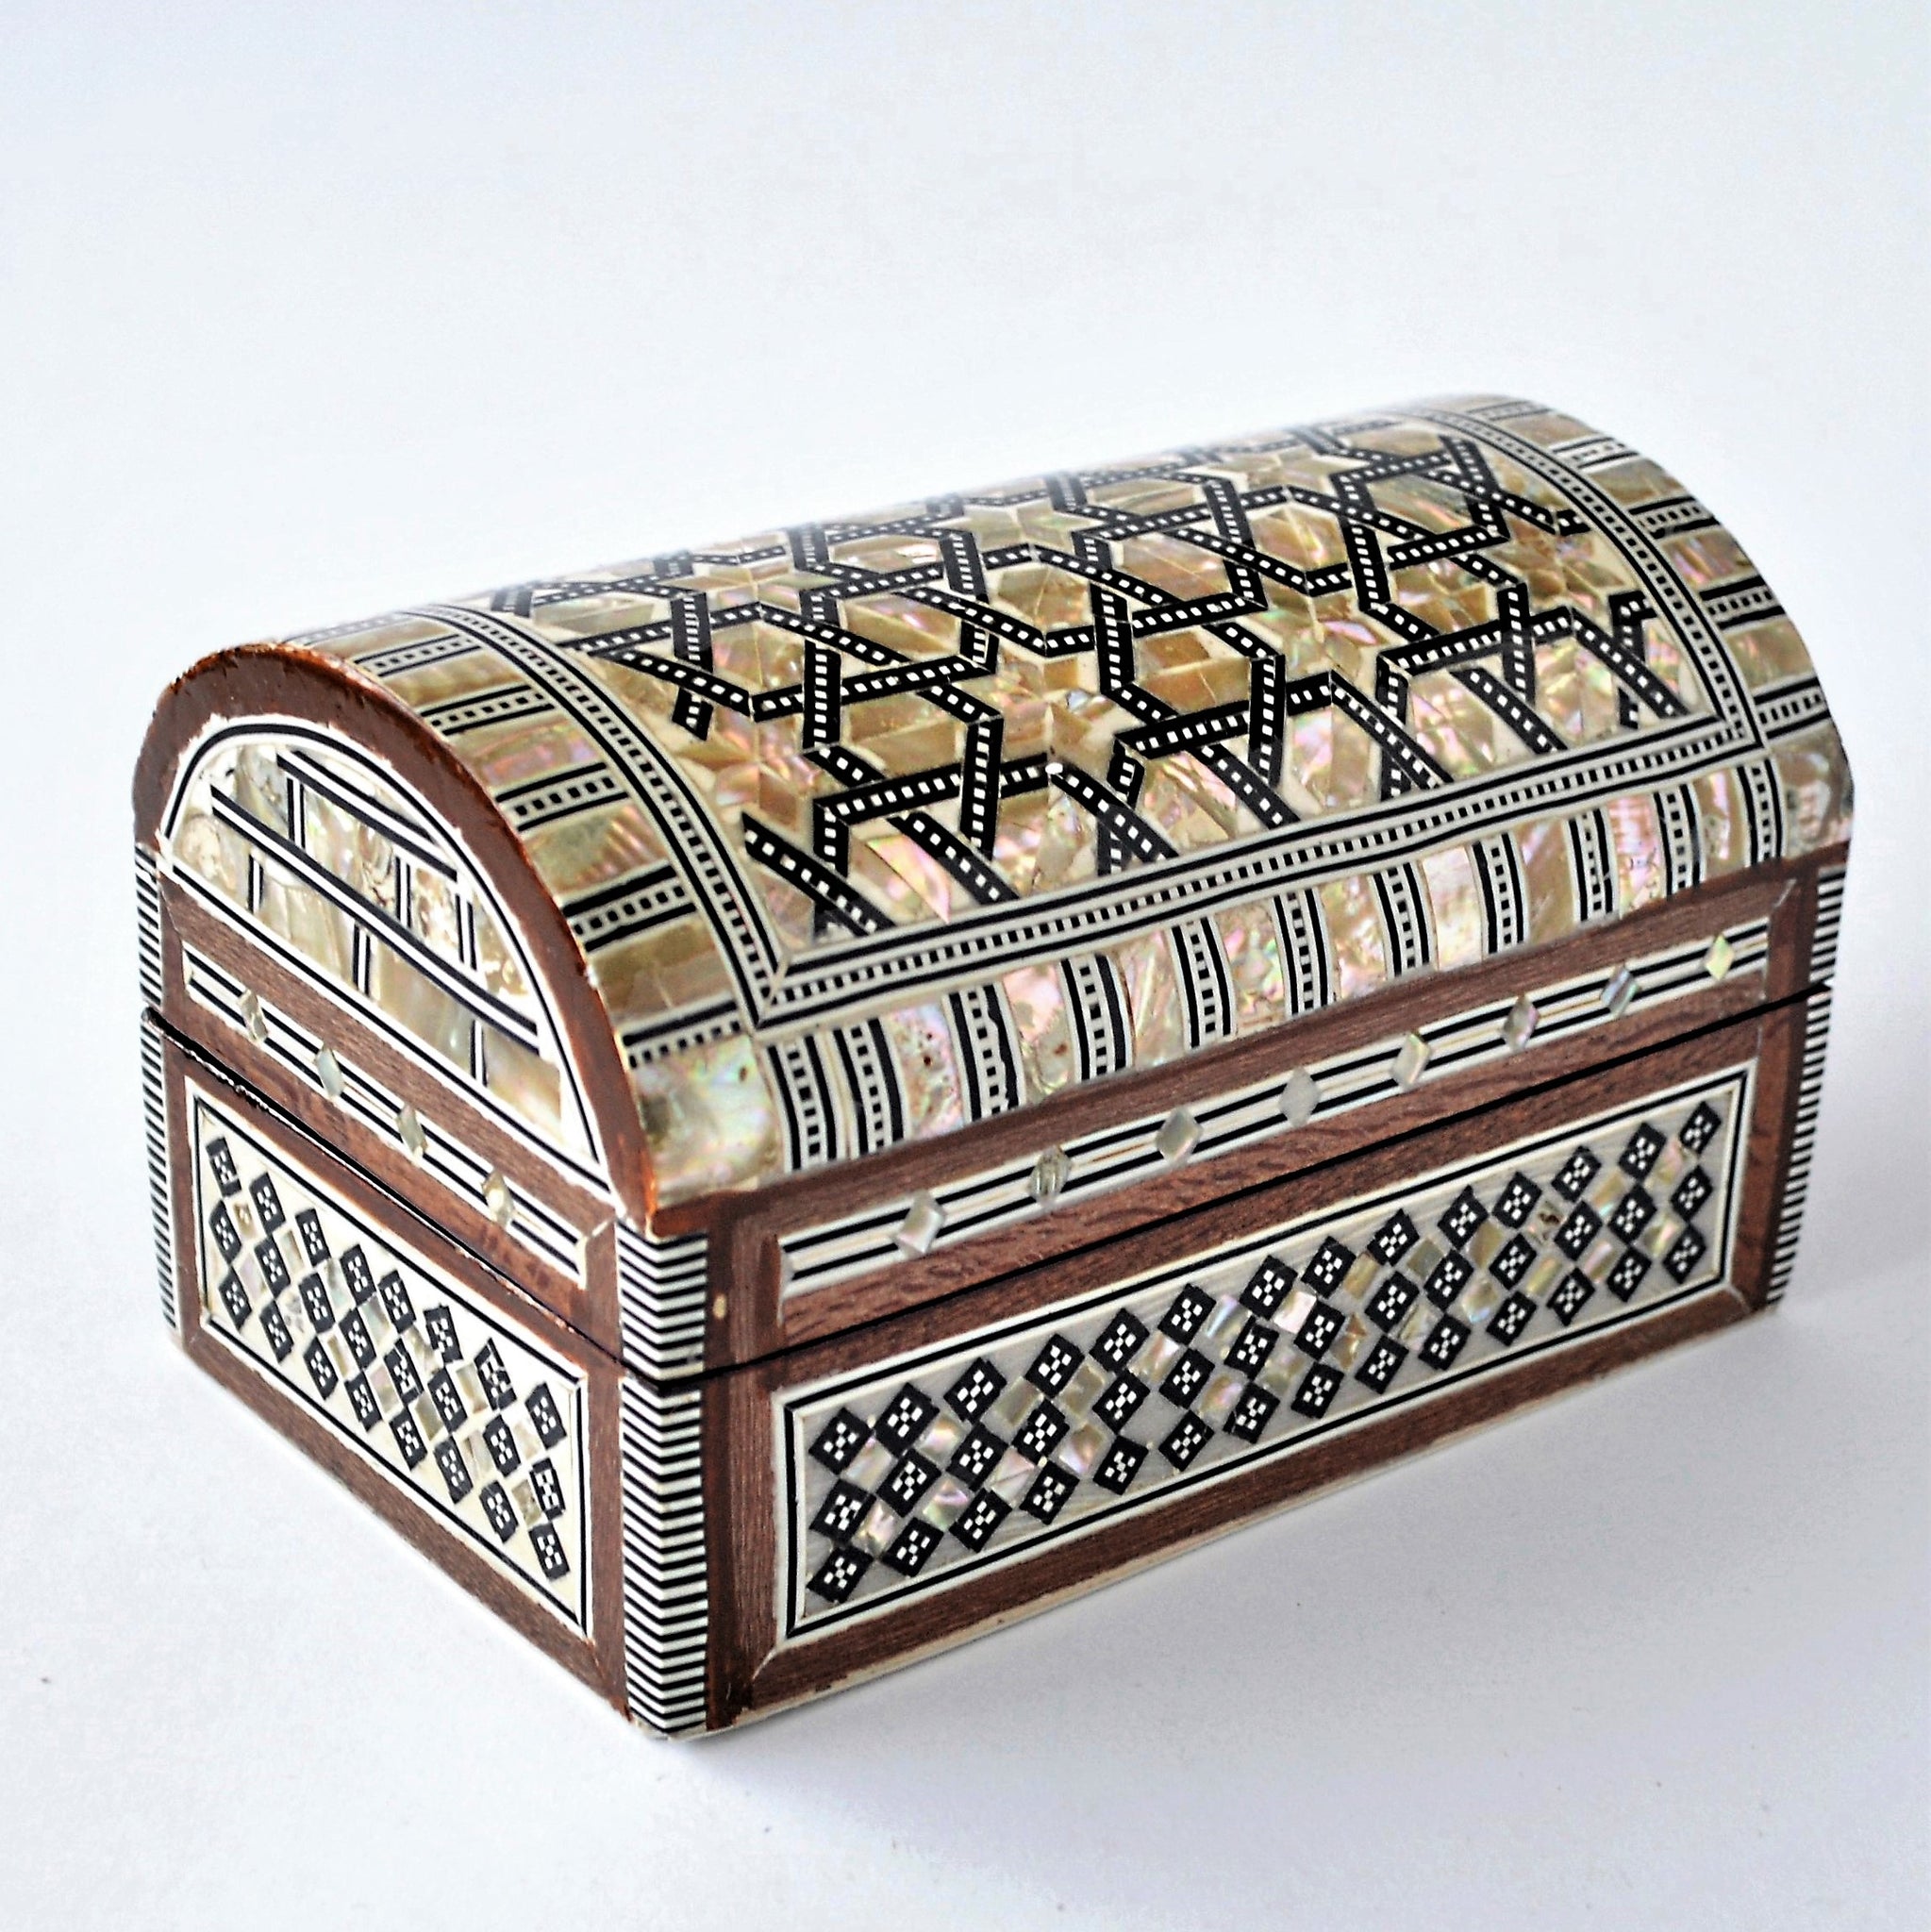 Inlaid mother of pearl jewelry wooden box